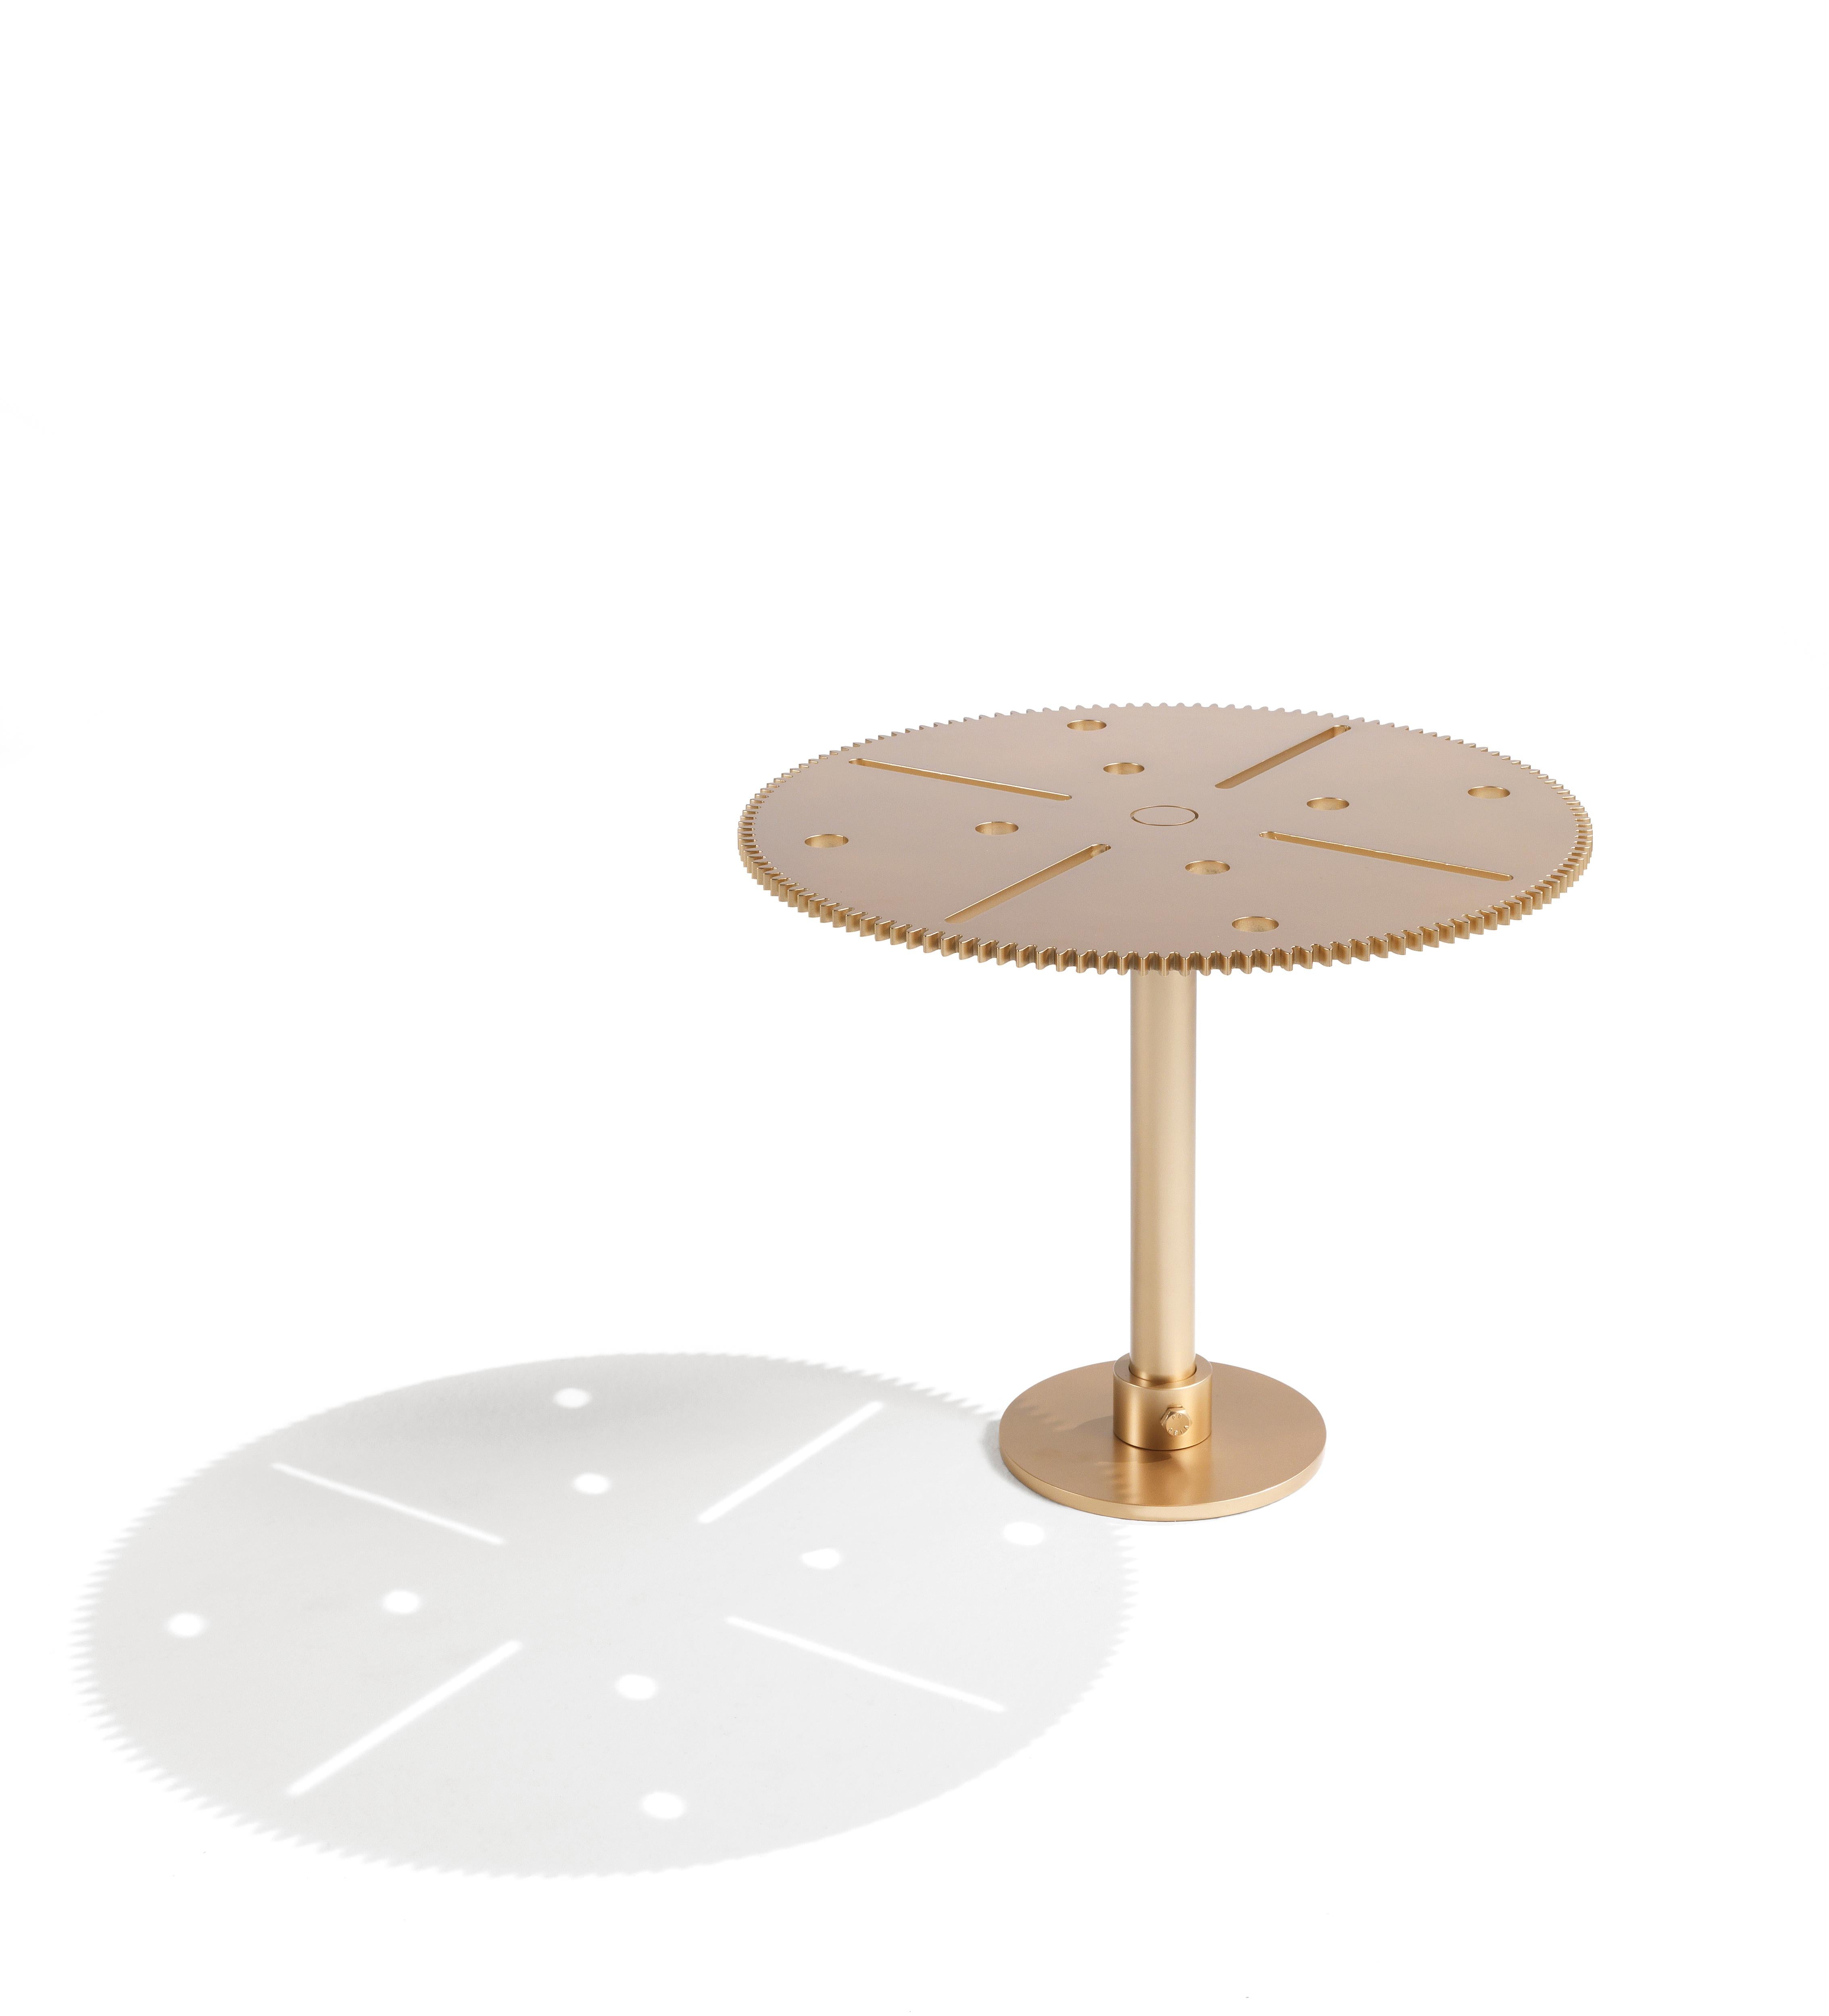 Maseen A-X side table by Samer Alameen
Materials: Structure in metal with matte brass finish.
Dimensions: 50 x 50 x 40 cm

Samer Alameen’s passion for Meccano finds a new form in Maseen side tables. More than a childhood toy or memory, Meccano